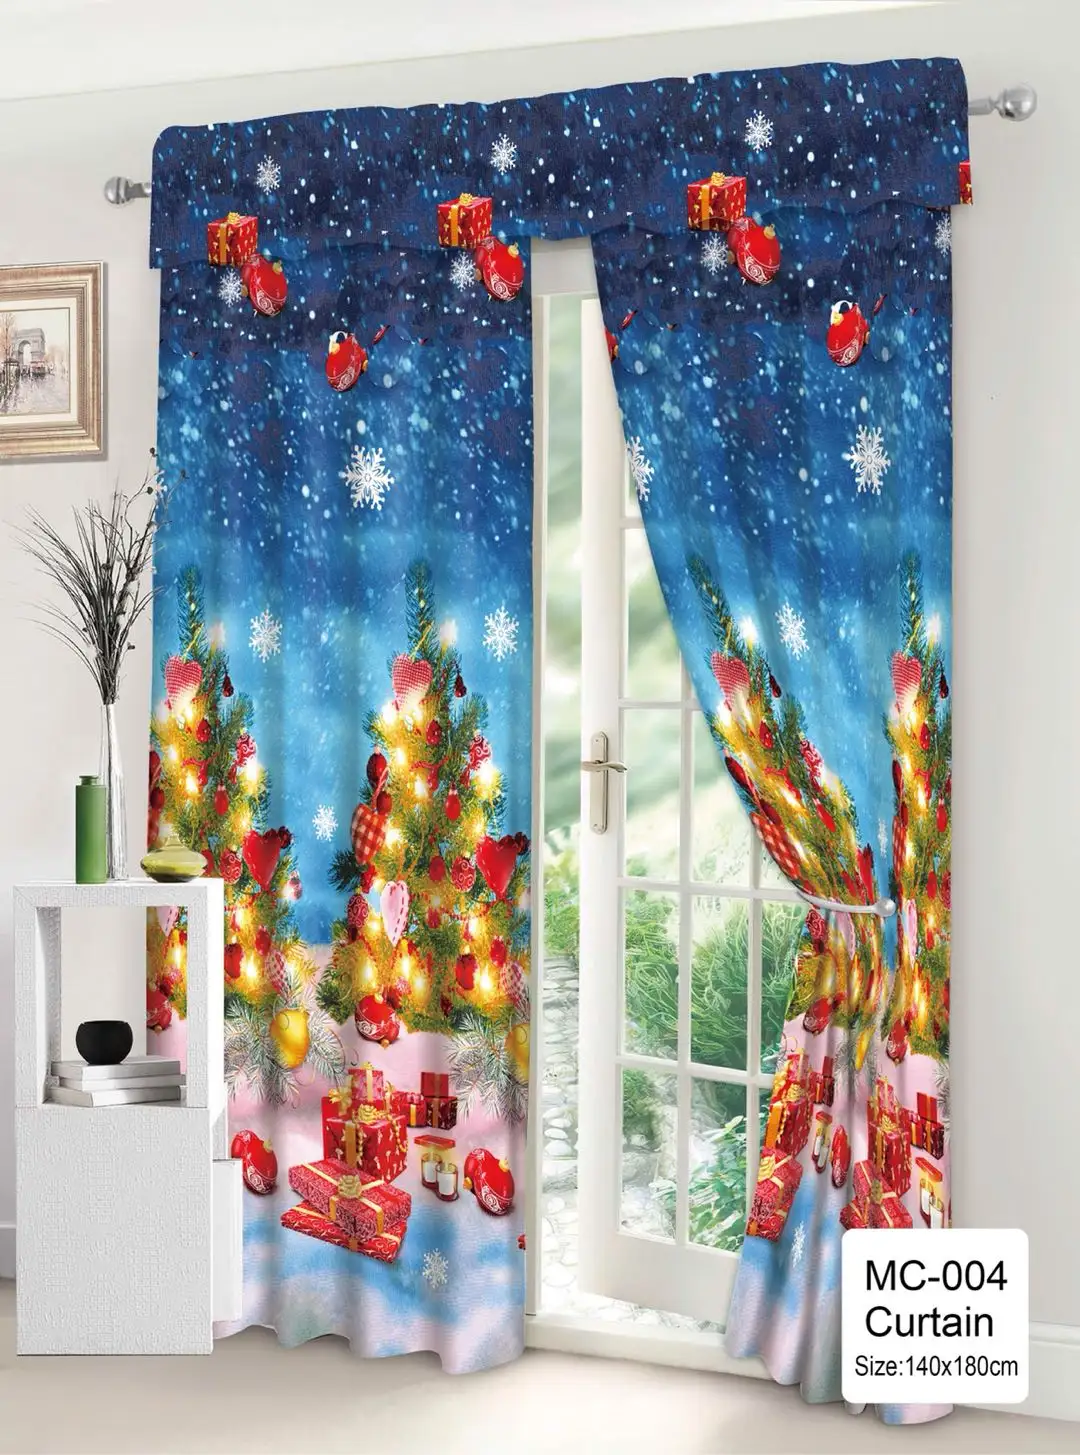 5Pcs Curtain Sale For Window Xmas Curtin Long For Door Kurtina Sale Kurtina For Window Classic Christmas Curtain Set Curtain For Window Curtain For Window Curtains Sale Living Room Curtain Sale For